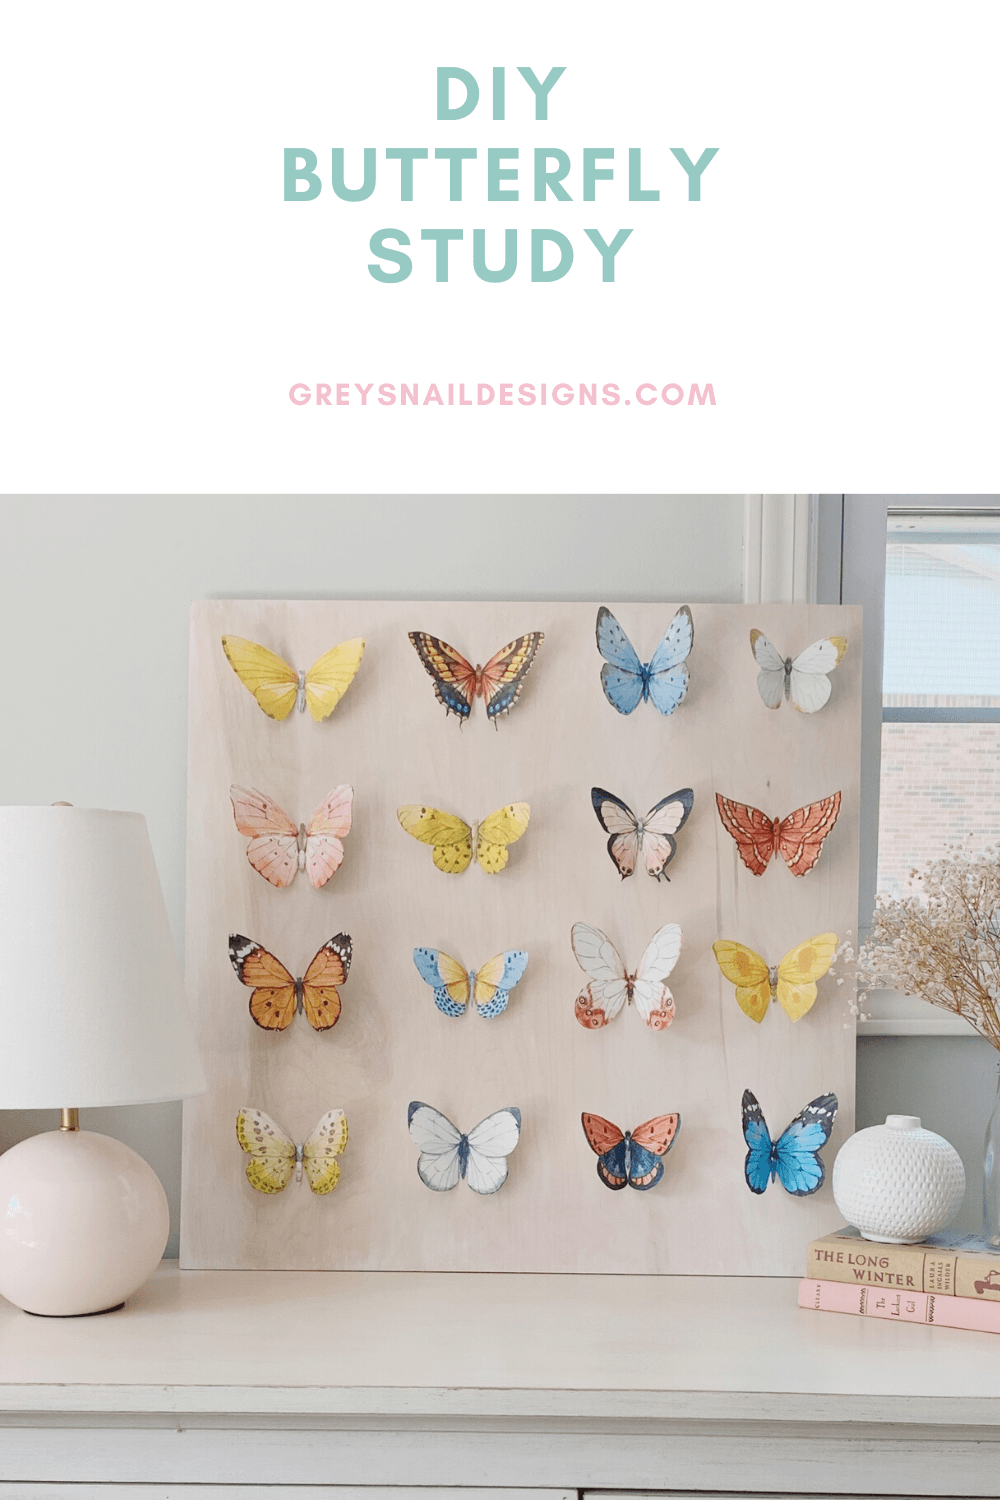 diy butterfly study on whitewashed board